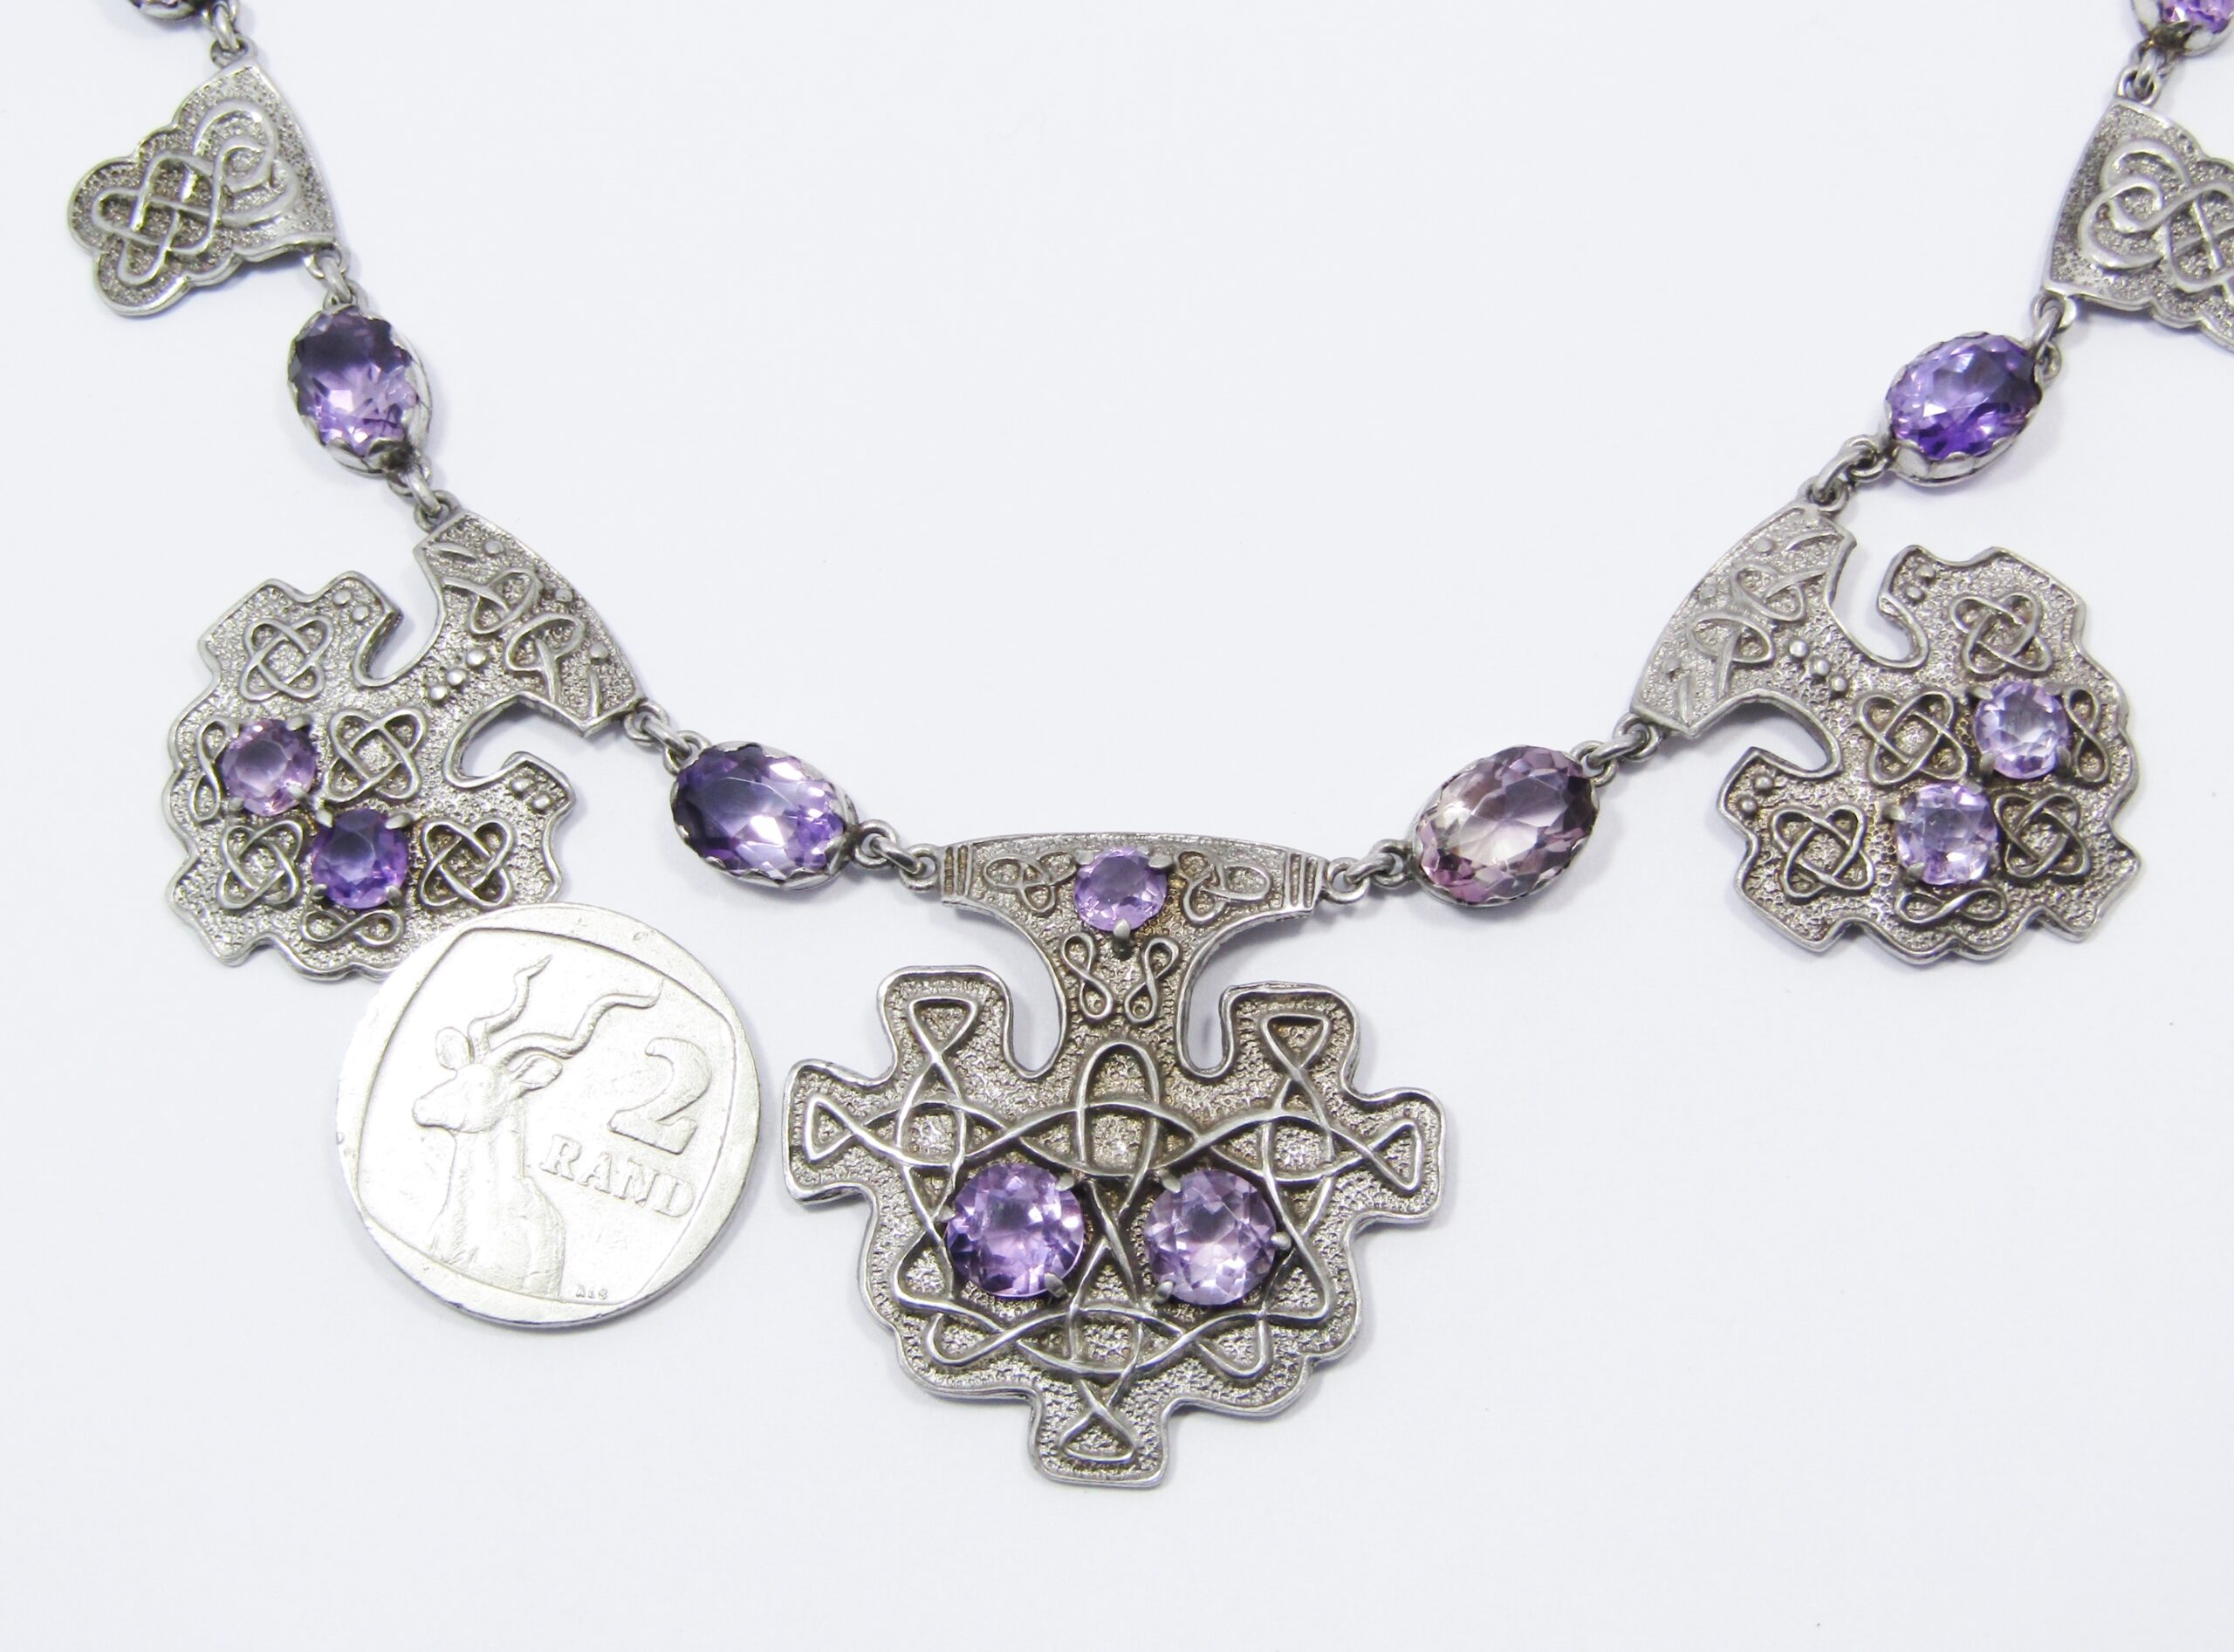 A Gorgeous Scandinavian Necklace With a Nordic Design Set with Amethyst in 830 Silver